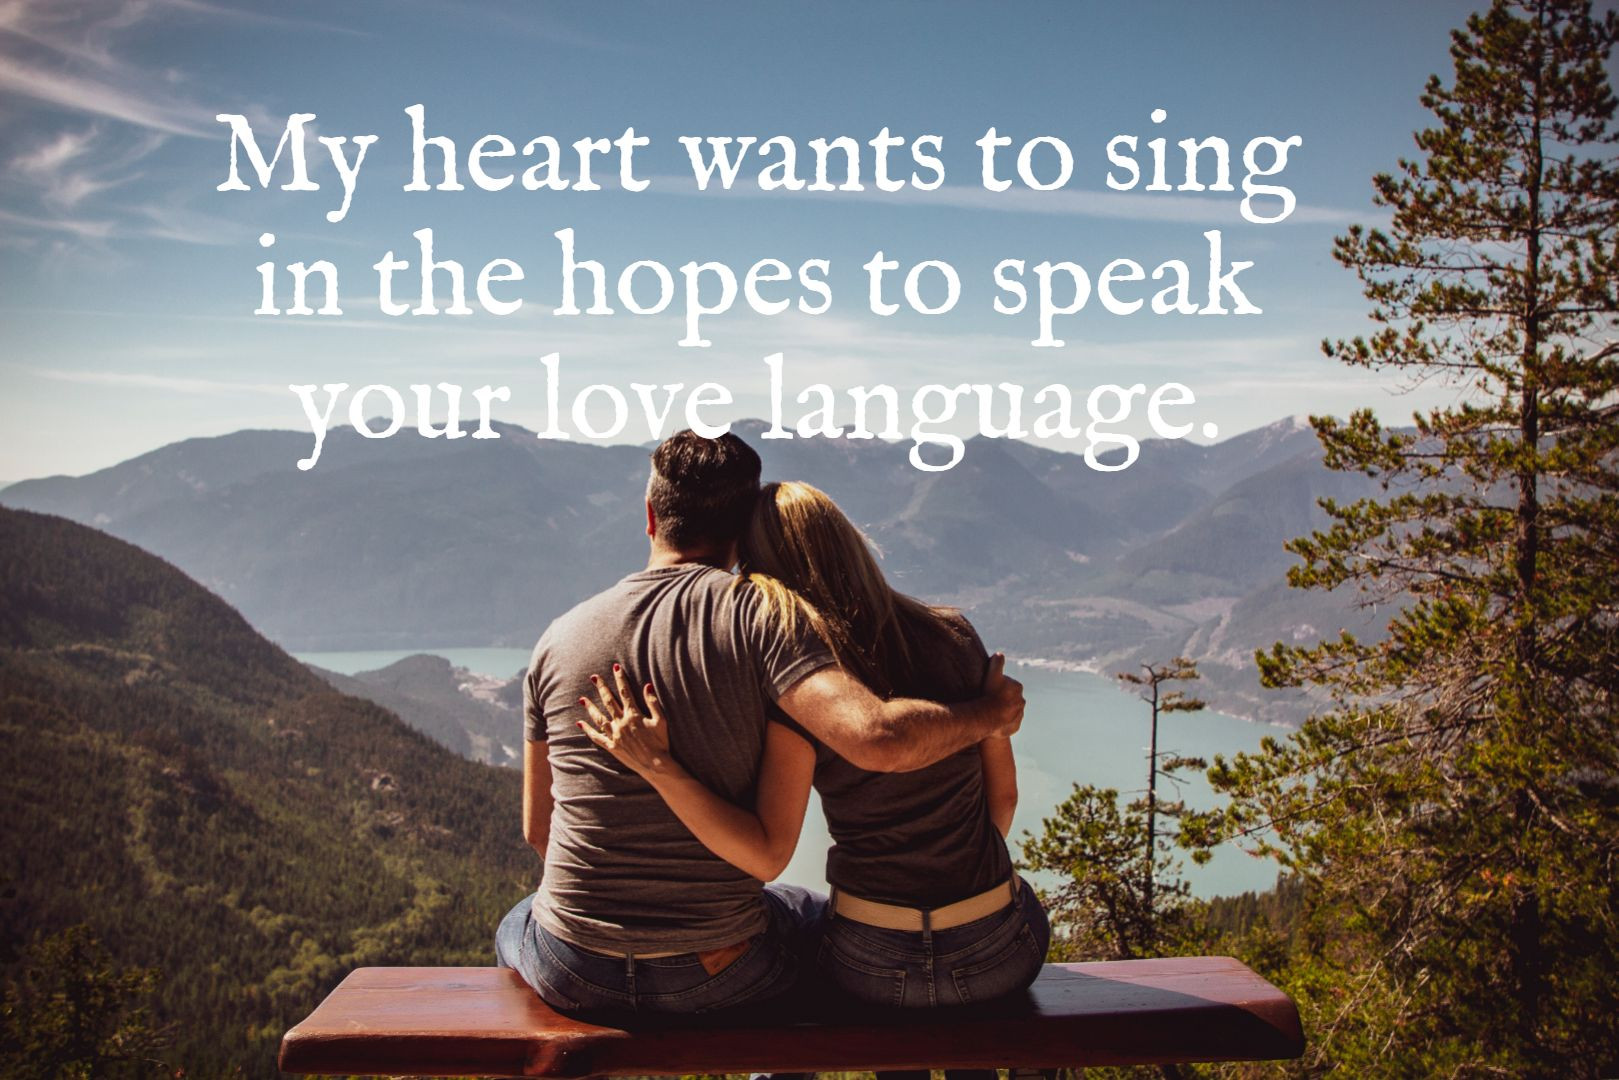 Love Quotes Sayings
 I will Design 20 Unique Love & Relationship Quotes for $5